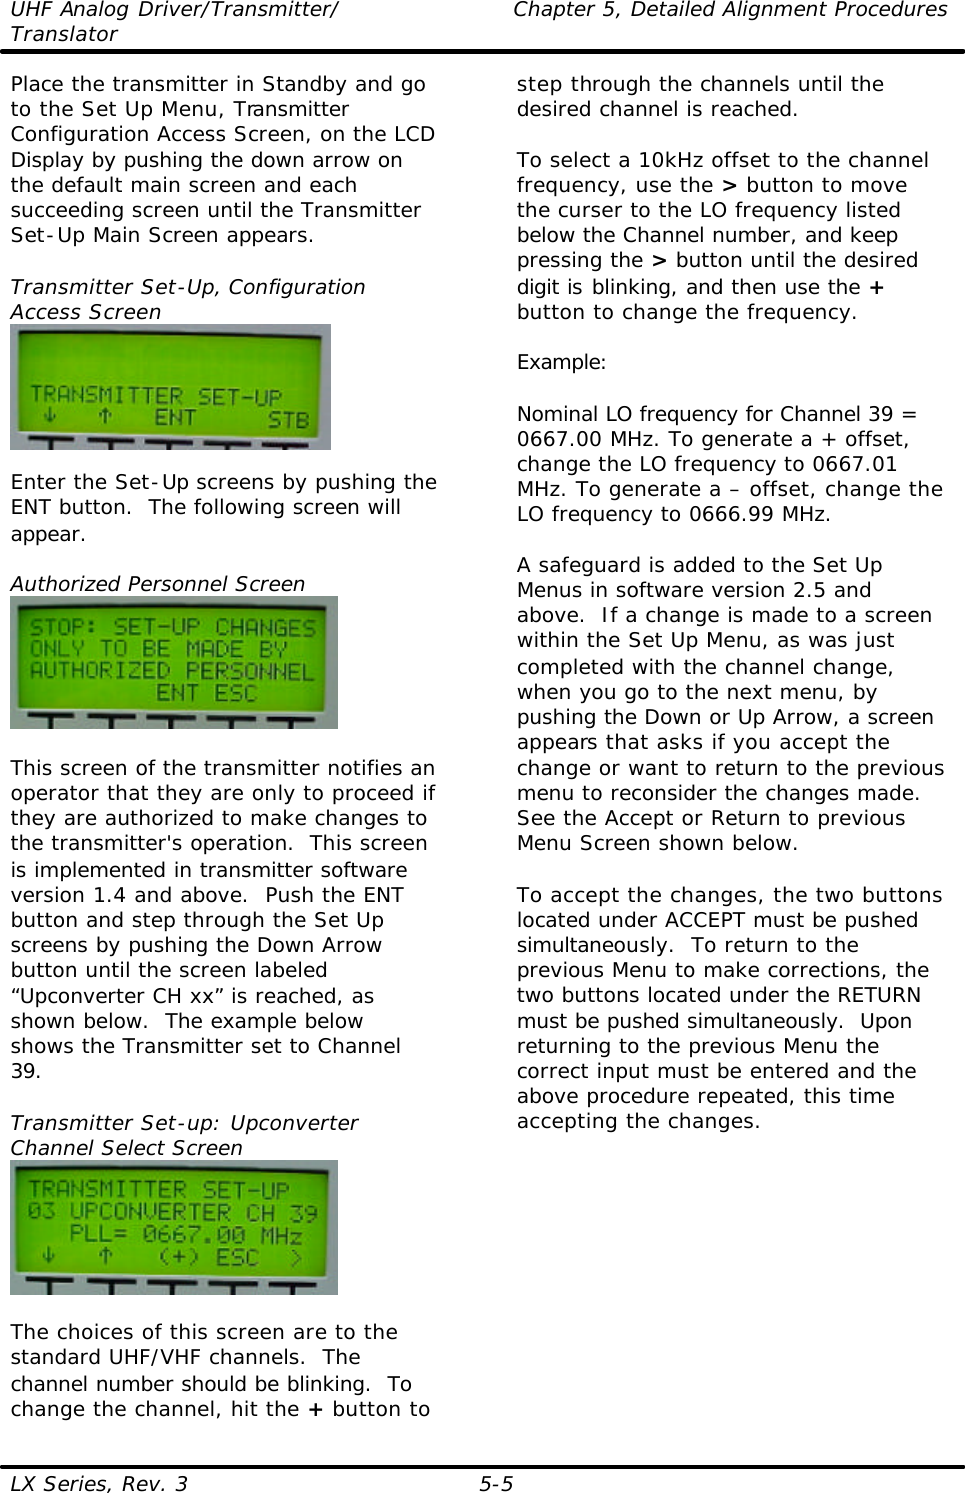 UHF Analog Driver/Transmitter/ Chapter 5, Detailed Alignment Procedures Translator  LX Series, Rev. 3 5-5 Place the transmitter in Standby and go to the Set Up Menu, Transmitter Configuration Access Screen, on the LCD Display by pushing the down arrow on the default main screen and each succeeding screen until the Transmitter Set-Up Main Screen appears.  Transmitter Set-Up, Configuration Access Screen   Enter the Set-Up screens by pushing the ENT button.  The following screen will appear.  Authorized Personnel Screen   This screen of the transmitter notifies an operator that they are only to proceed if they are authorized to make changes to the transmitter&apos;s operation.  This screen is implemented in transmitter software version 1.4 and above.  Push the ENT button and step through the Set Up screens by pushing the Down Arrow button until the screen labeled “Upconverter CH xx” is reached, as shown below.  The example below shows the Transmitter set to Channel 39.  Transmitter Set-up: Upconverter Channel Select Screen   The choices of this screen are to the standard UHF/VHF channels.  The channel number should be blinking.  To change the channel, hit the + button to step through the channels until the desired channel is reached.   To select a 10kHz offset to the channel frequency, use the &gt; button to move the curser to the LO frequency listed below the Channel number, and keep pressing the &gt; button until the desired digit is blinking, and then use the + button to change the frequency.   Example:  Nominal LO frequency for Channel 39 = 0667.00 MHz. To generate a + offset, change the LO frequency to 0667.01 MHz. To generate a – offset, change the LO frequency to 0666.99 MHz.  A safeguard is added to the Set Up Menus in software version 2.5 and above.  If a change is made to a screen within the Set Up Menu, as was just completed with the channel change, when you go to the next menu, by pushing the Down or Up Arrow, a screen appears that asks if you accept the change or want to return to the previous menu to reconsider the changes made.  See the Accept or Return to previous Menu Screen shown below.  To accept the changes, the two buttons located under ACCEPT must be pushed simultaneously.  To return to the previous Menu to make corrections, the two buttons located under the RETURN must be pushed simultaneously.  Upon returning to the previous Menu the correct input must be entered and the above procedure repeated, this time accepting the changes. 